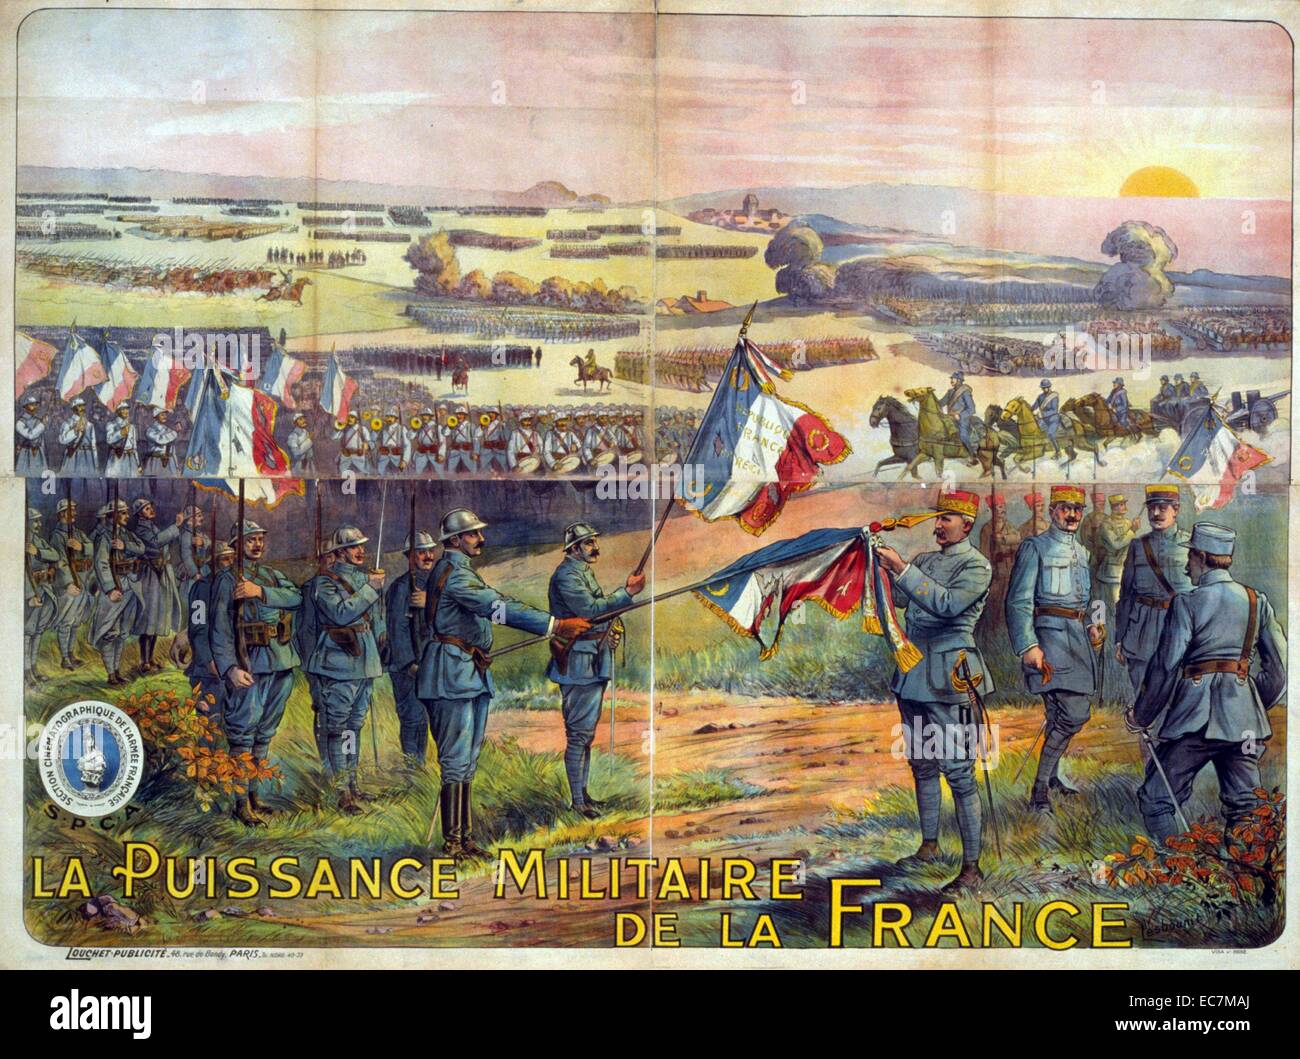 La puissance militaire de la France. French troops (infantrymen, cavalry, etc.) gathering on a field. Field Marshal Philippe Petain (1856-1951) is pinning a medal on a French flag. Stock Photo